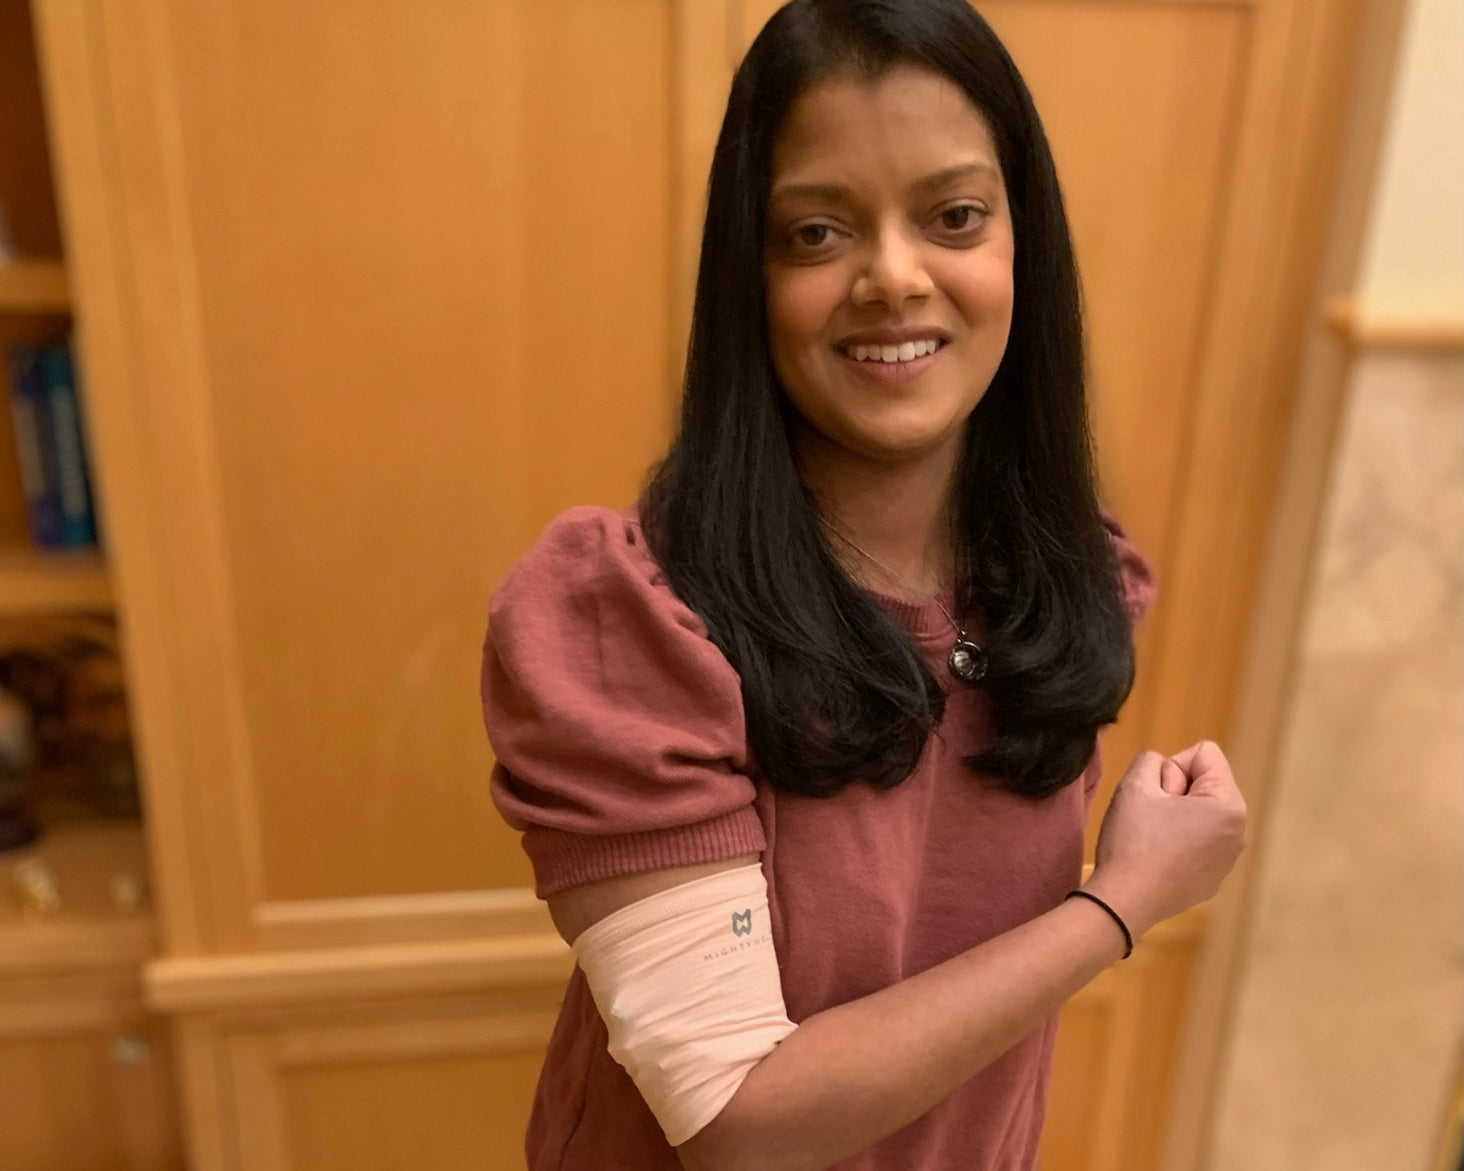 Swapna wears the PICCPerfect<sup>®</sup> PICC Line Cover in Blush by Mighty Well